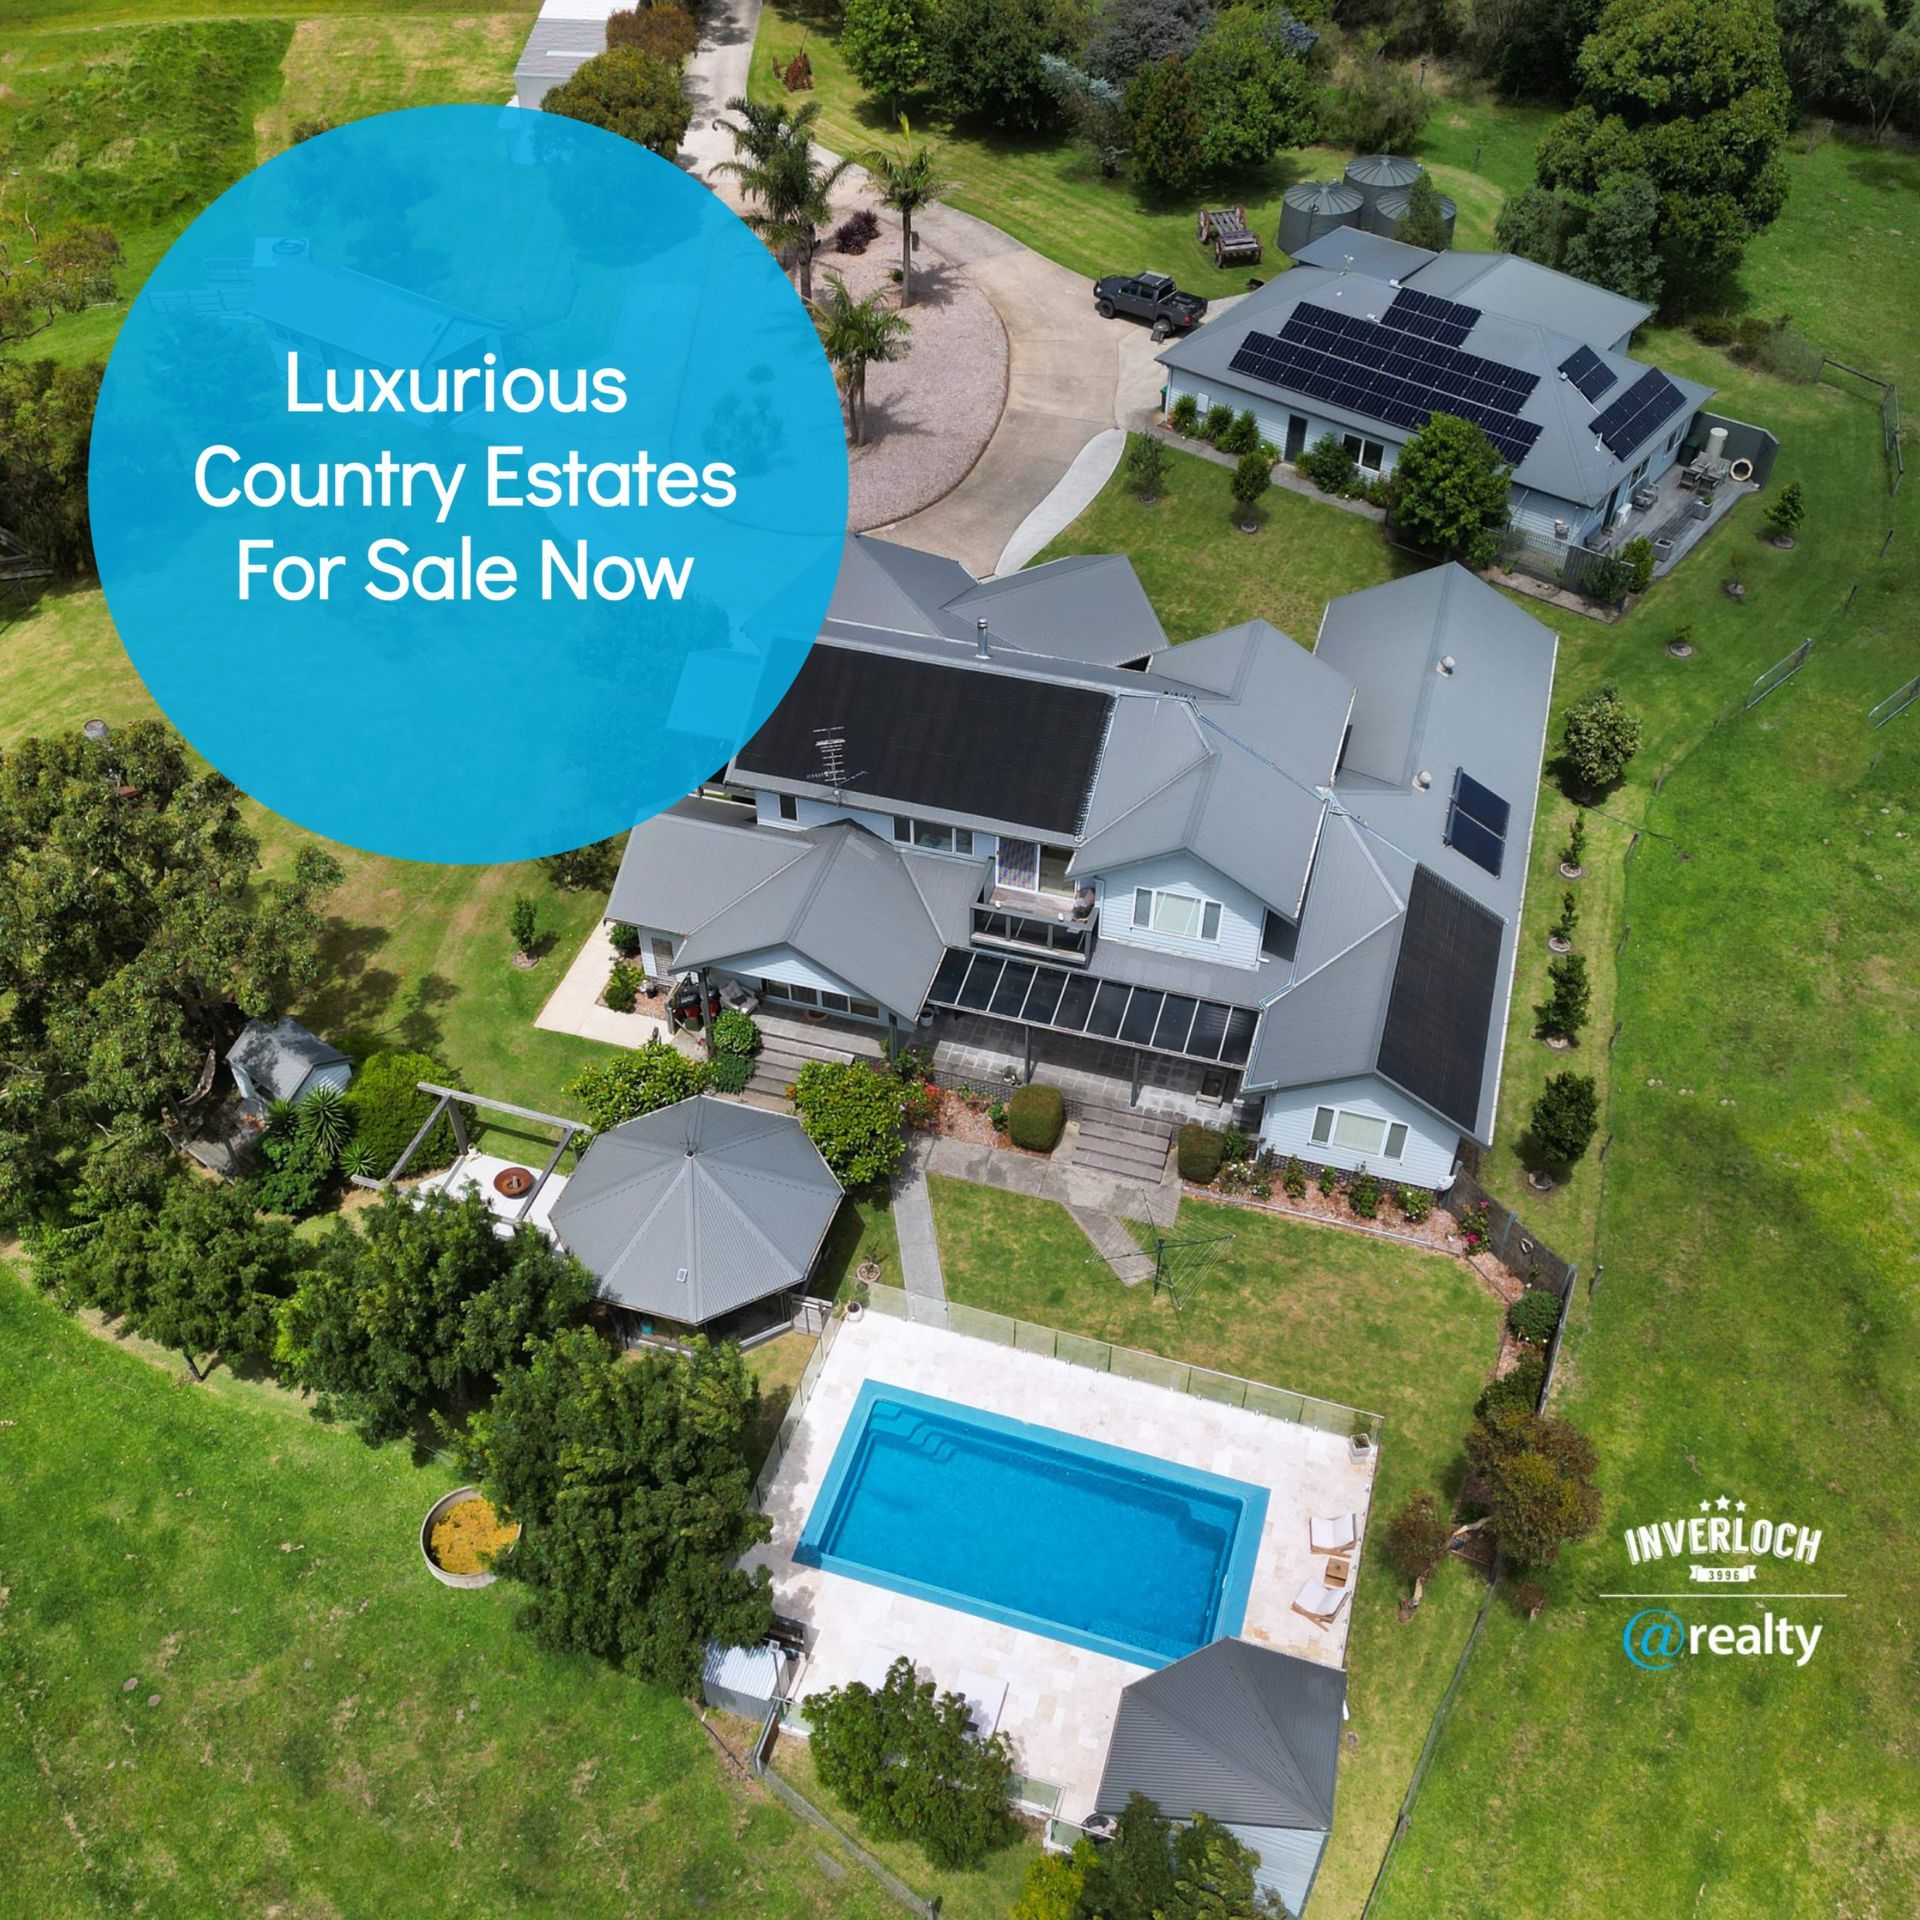 an aerial view of a luxurious country estate for sale